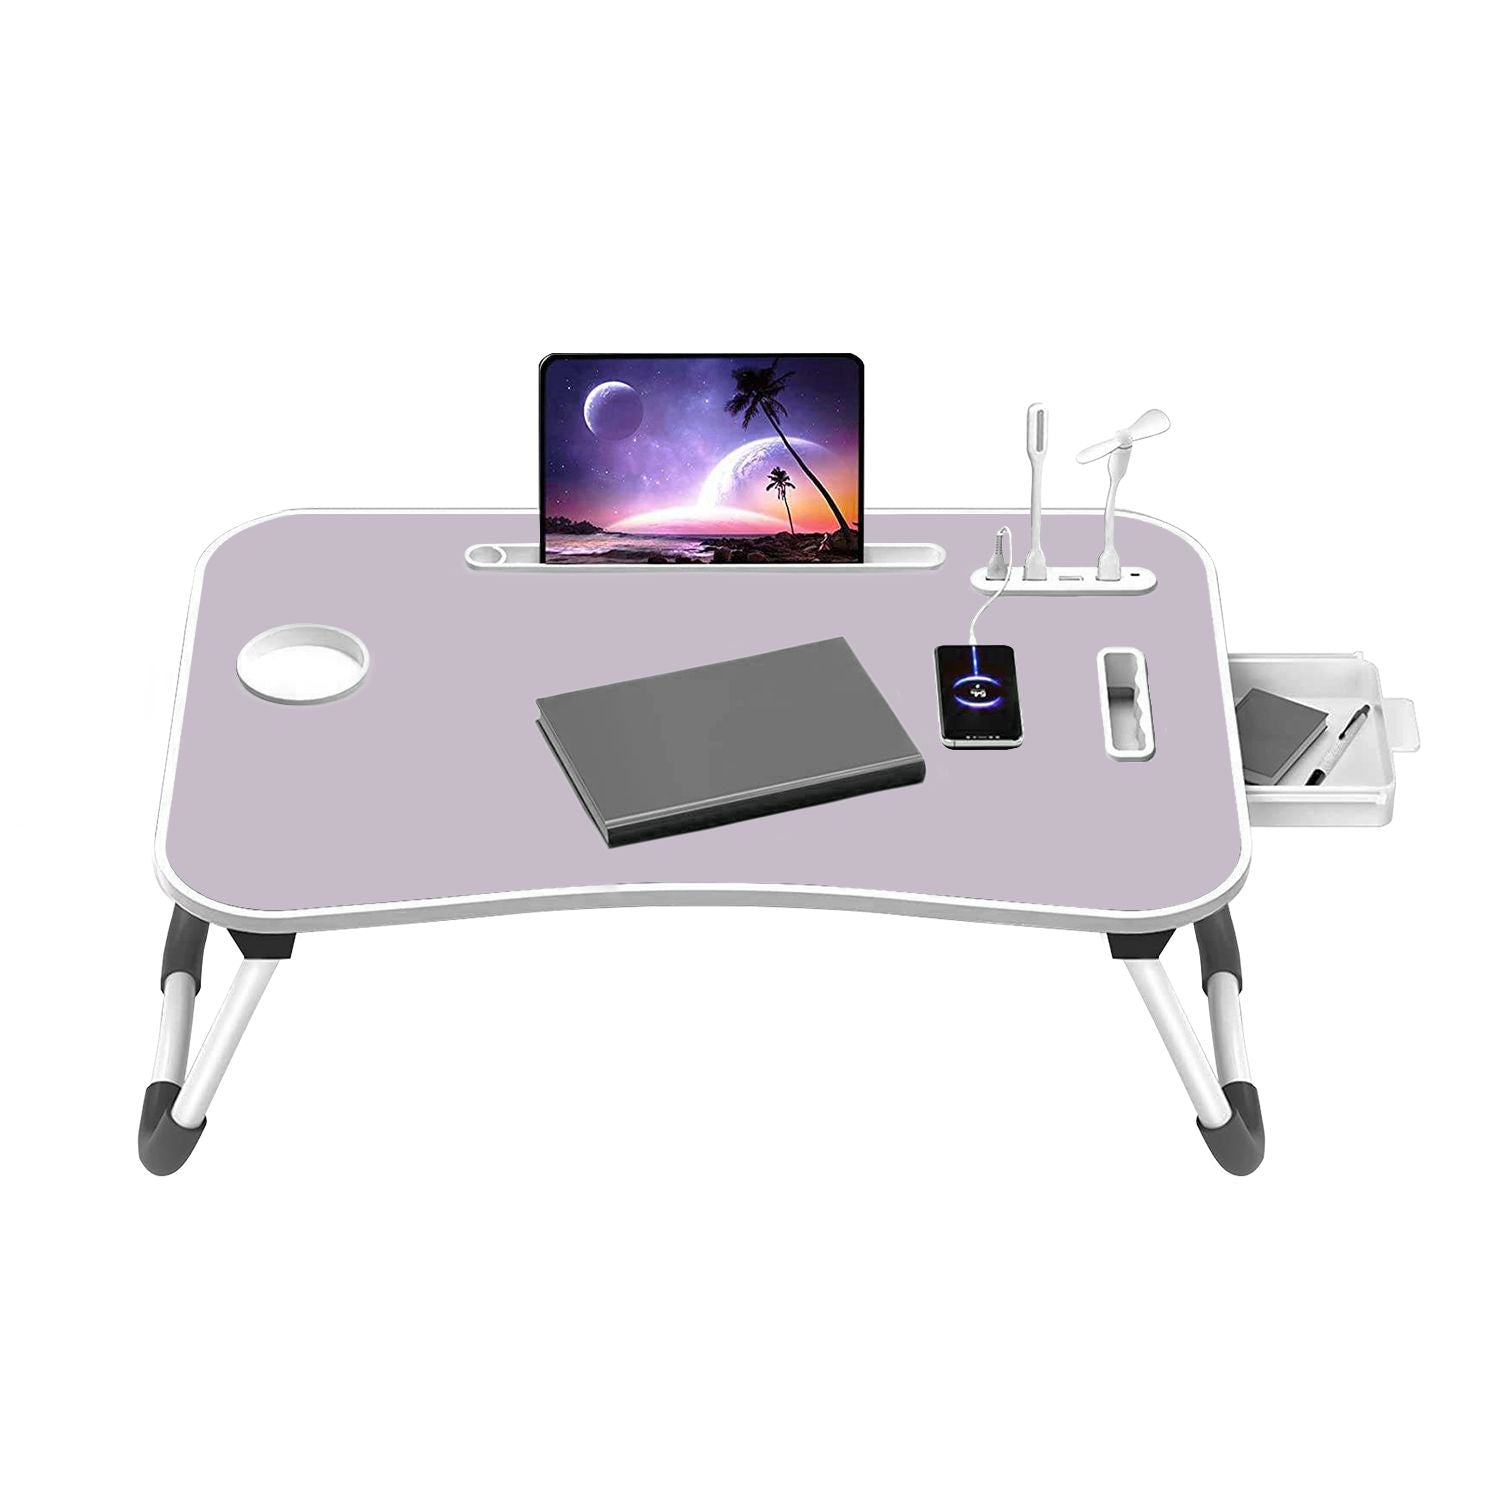 Portable Laptop Bed Desk Foldable Legs with USB Charge Port Home Office White